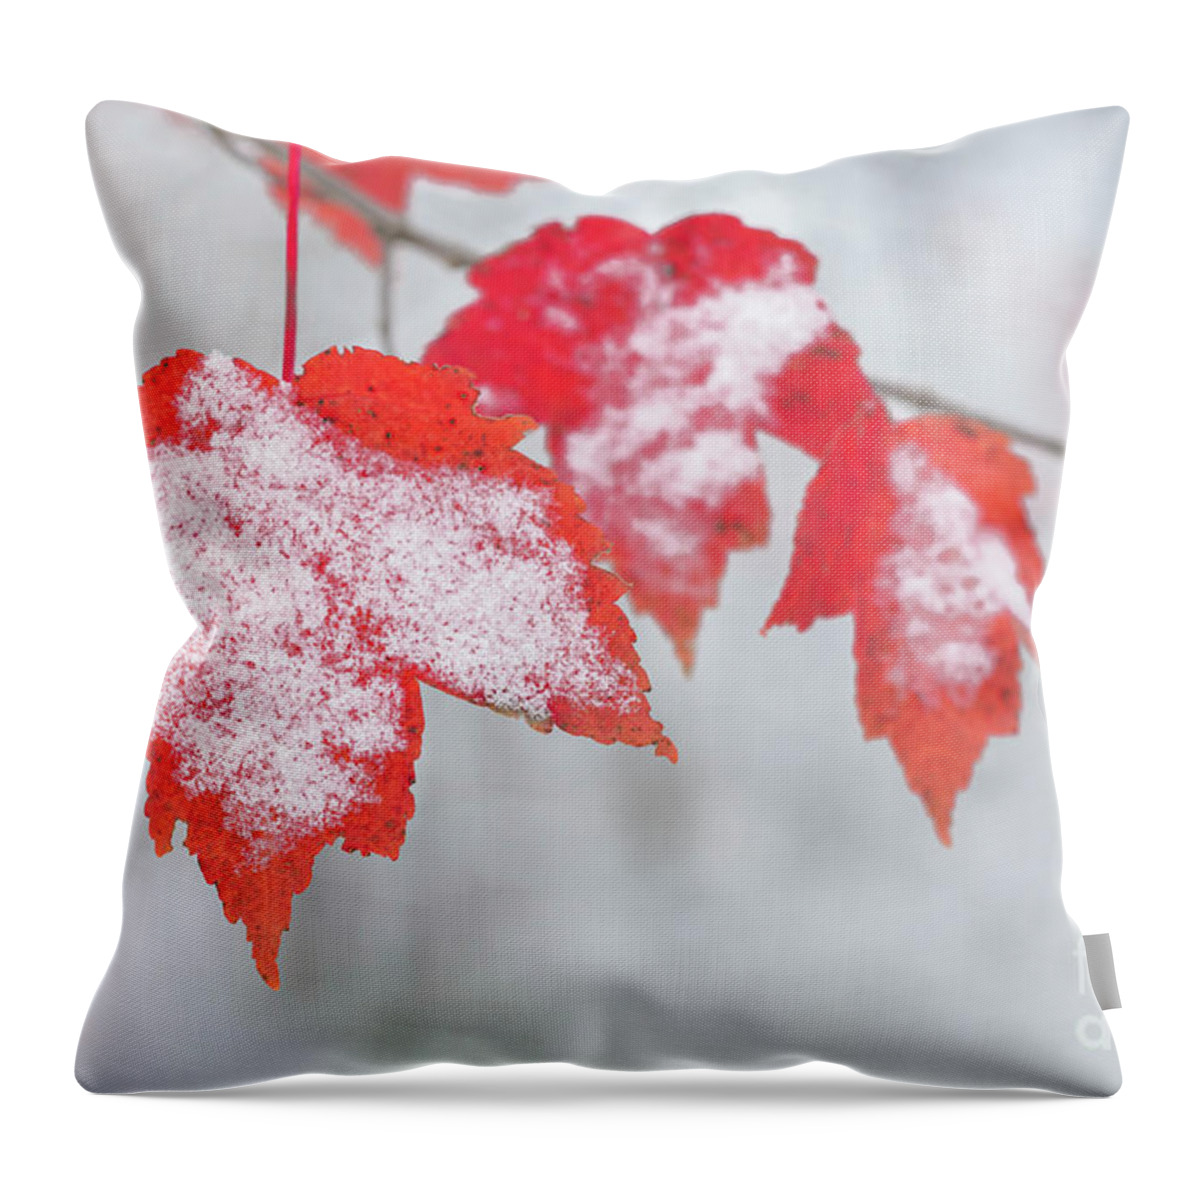 Red Maple Leaves Throw Pillow featuring the photograph Snow Covered Red Maple Leaves by Tamara Becker